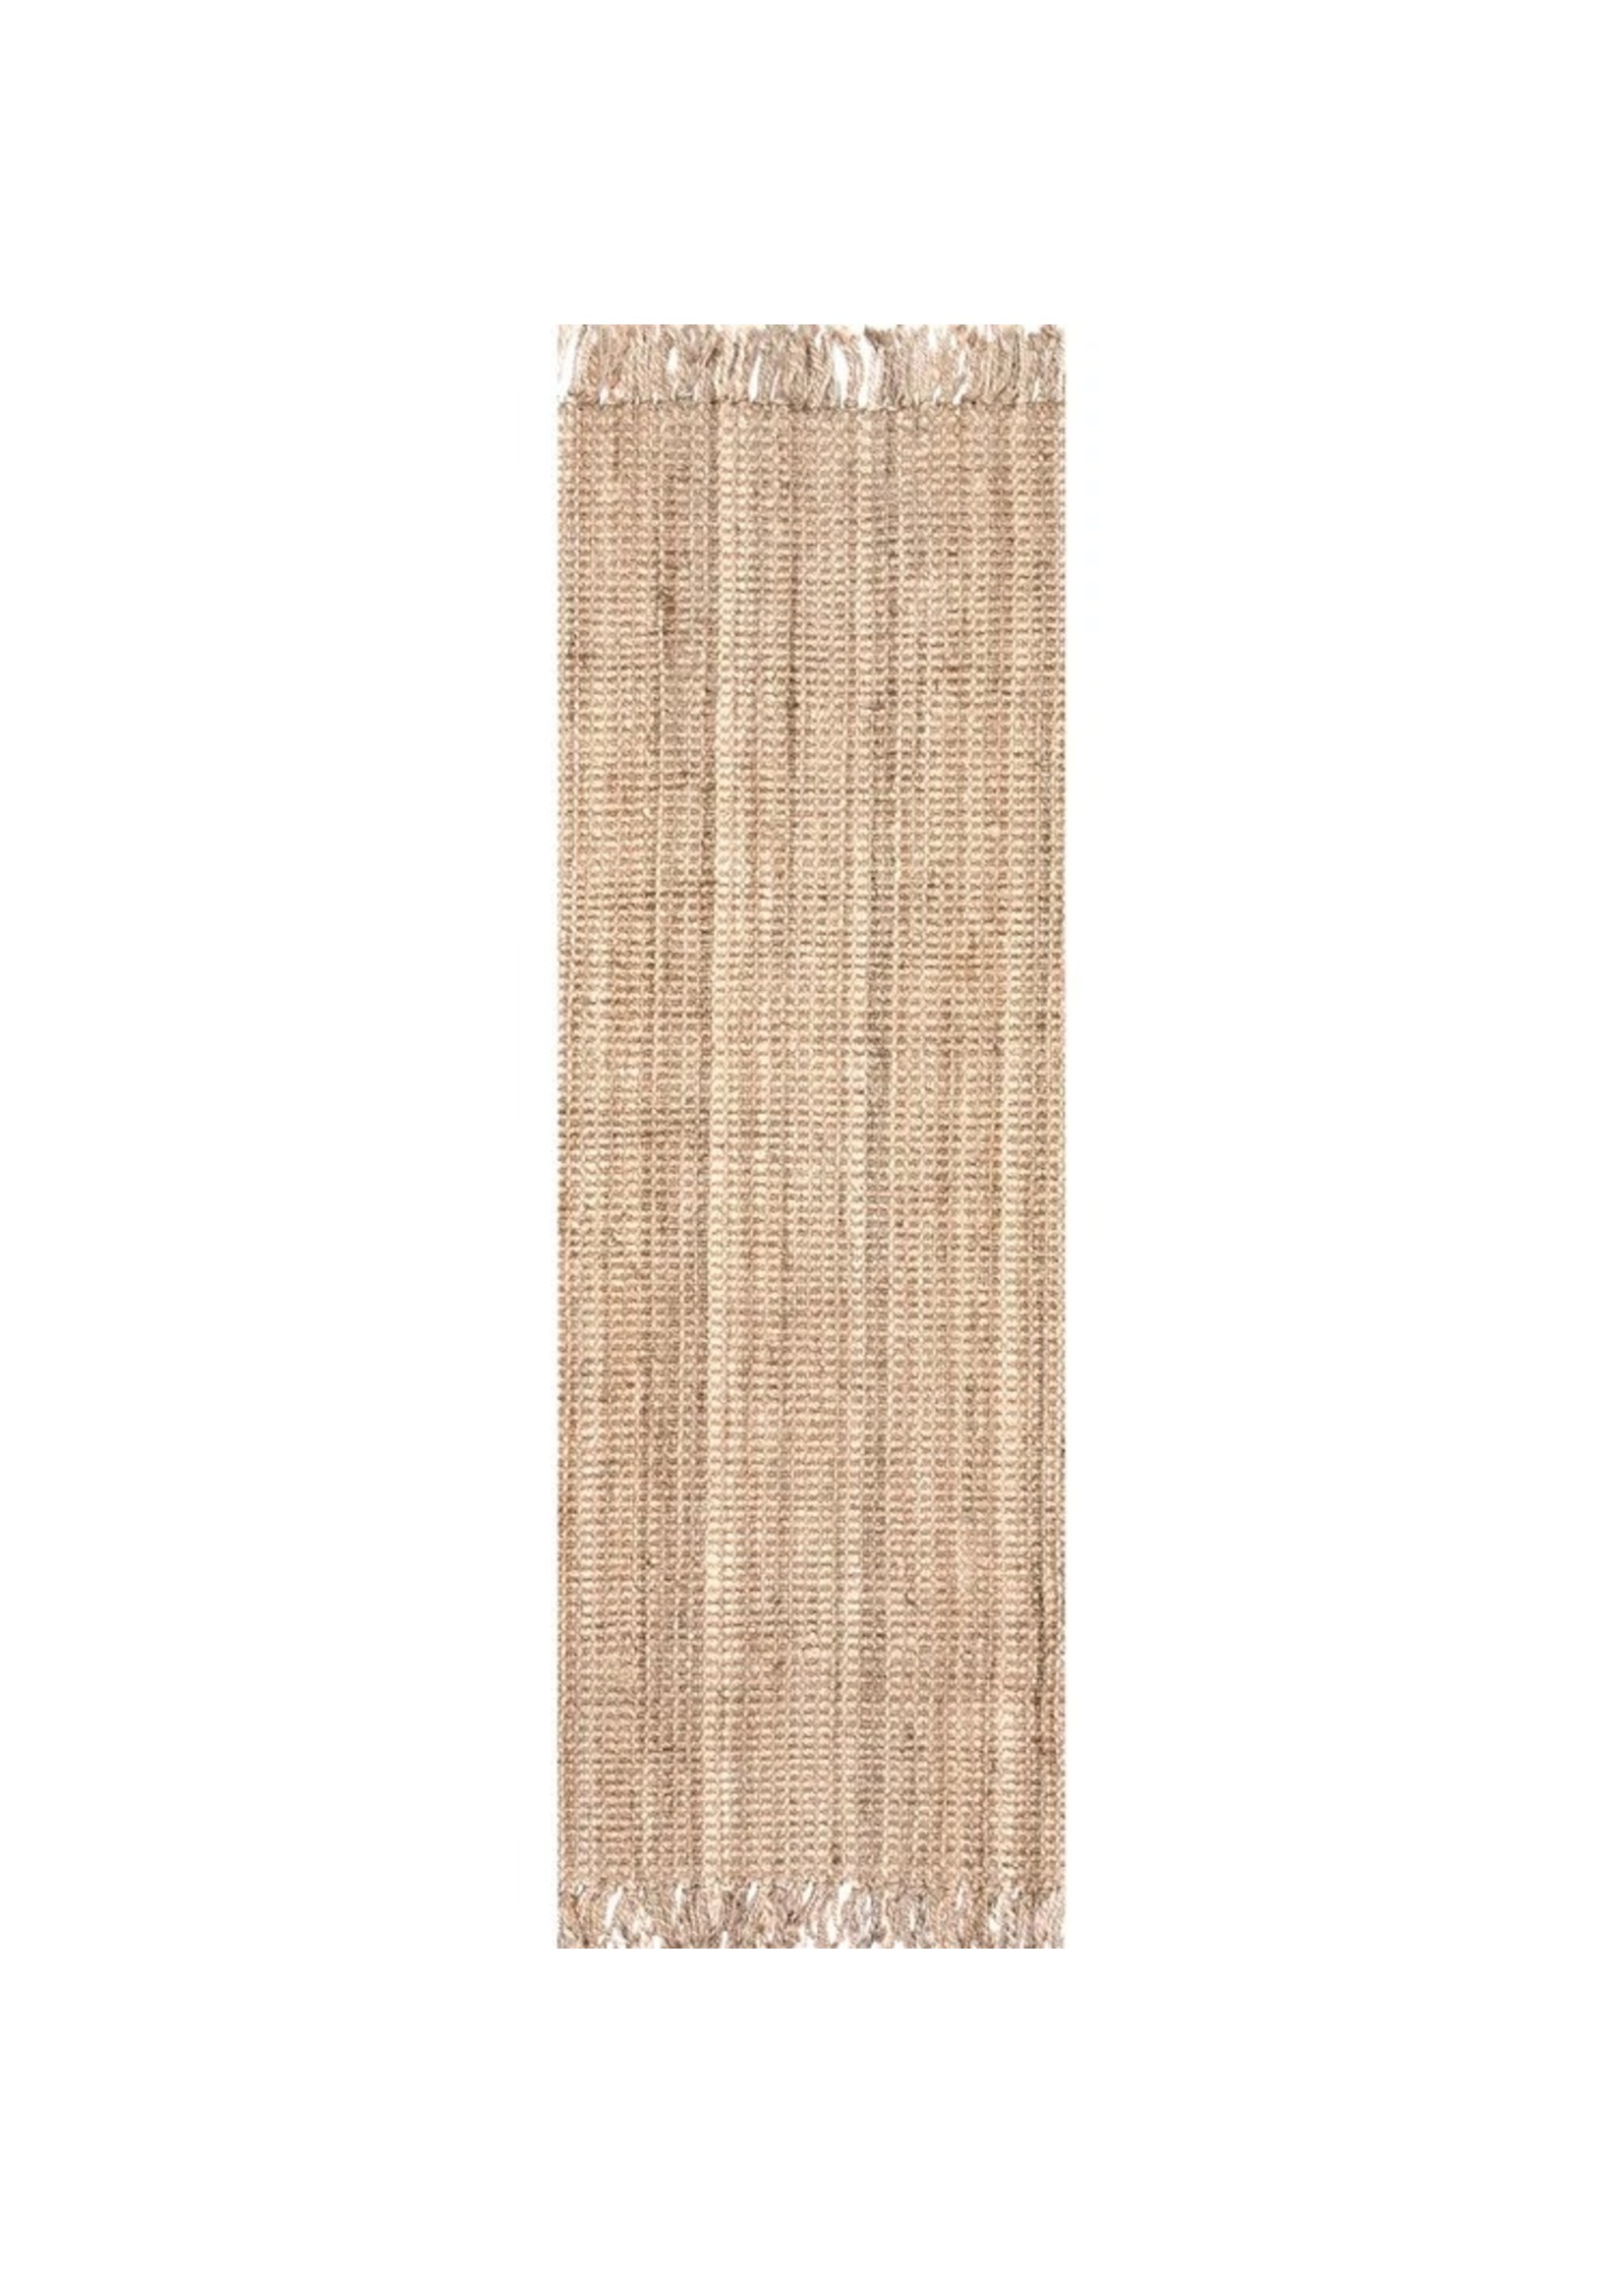 *2'6" x 12' Heathfield Natural Fiber Hand-Knotted Brown Area Rug